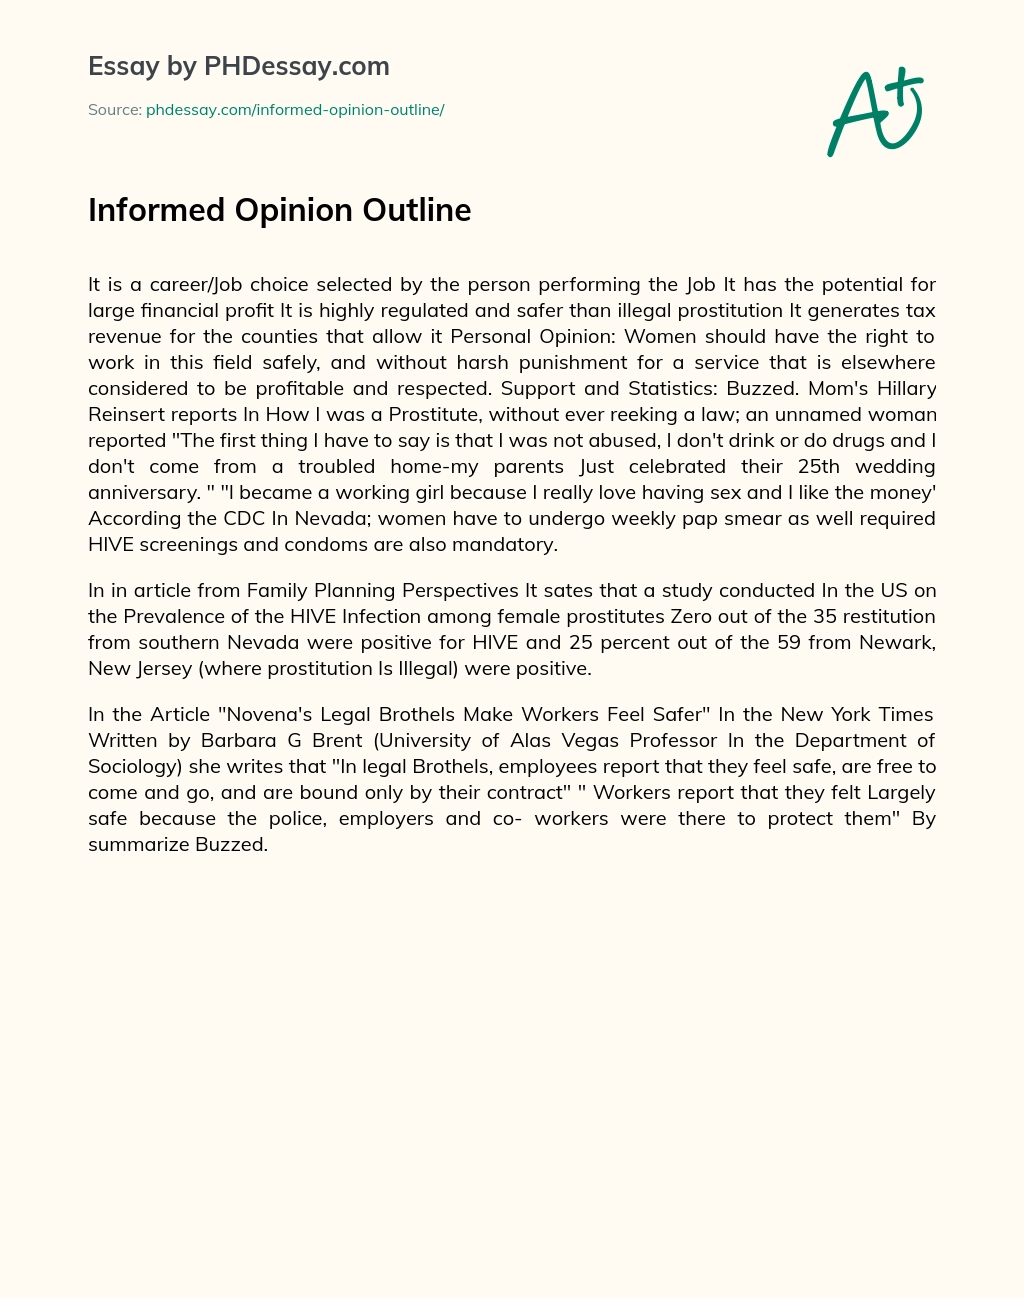 Informed Opinion Outline essay